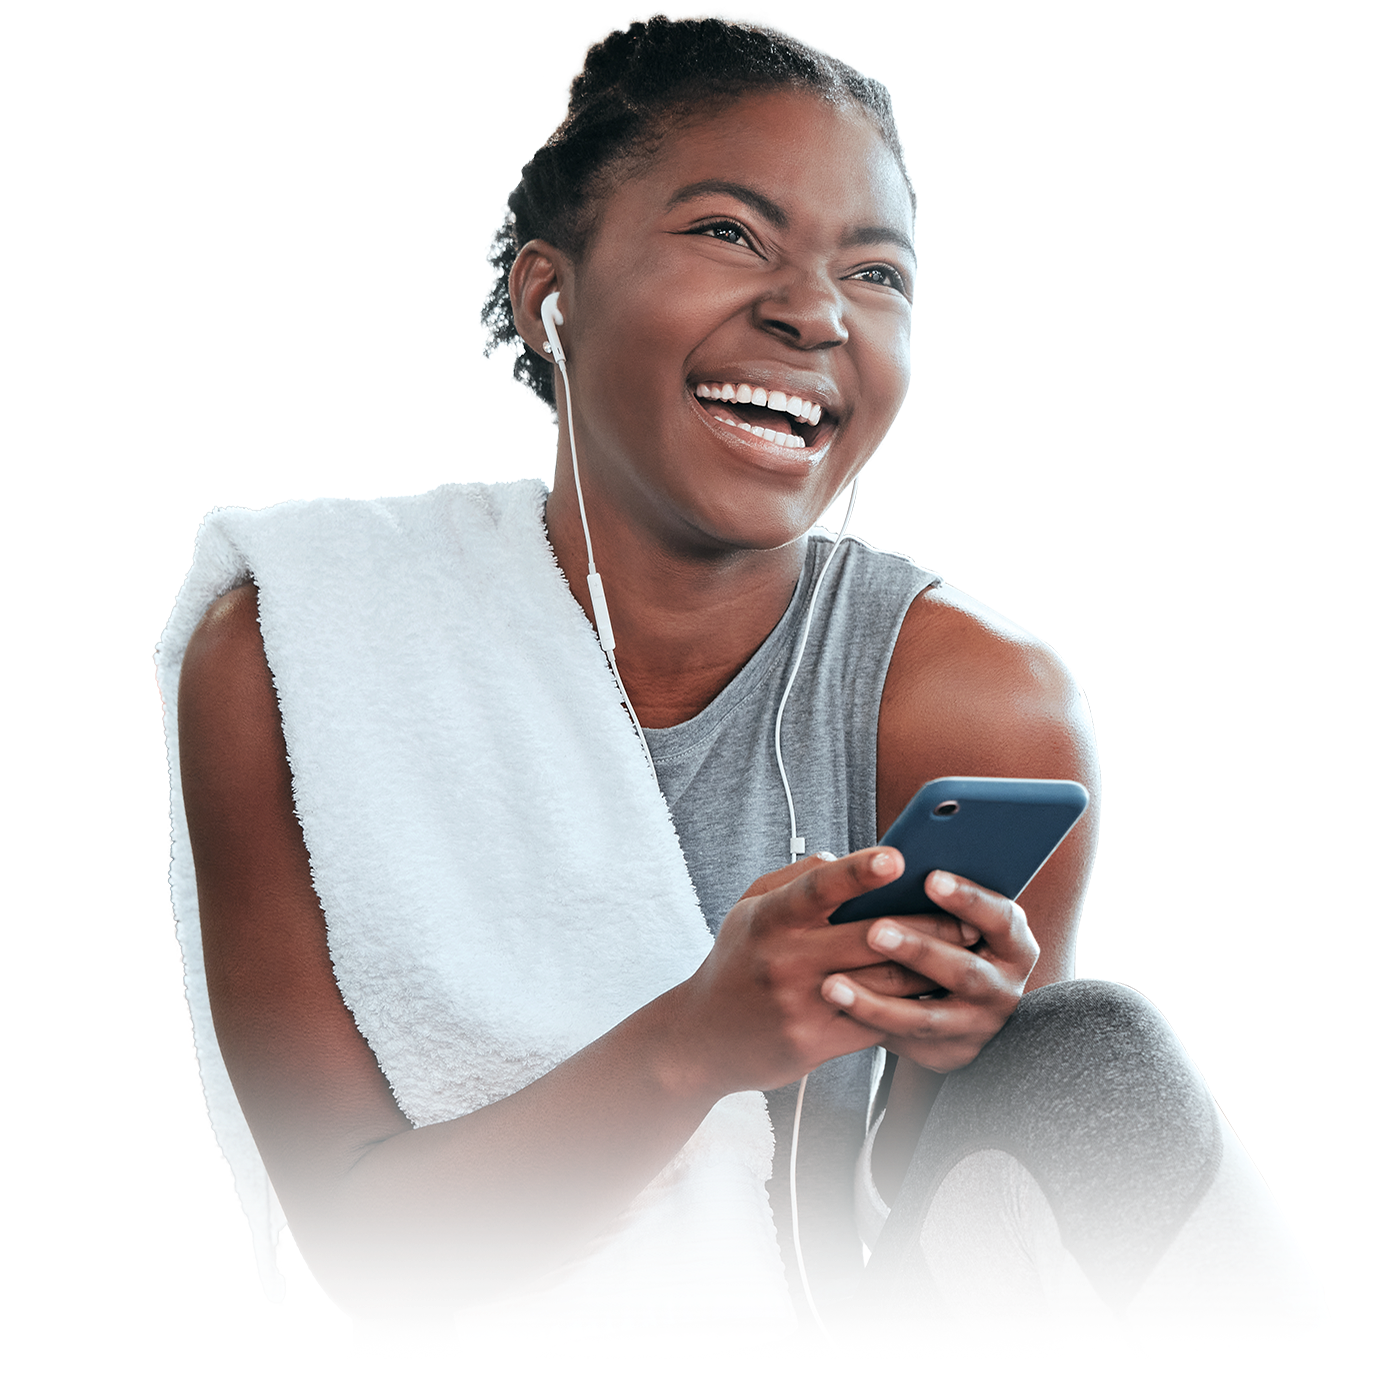 A woman in a gray top with a white towel on her shoulder, laughing with earphones connected to a phone in her hand.